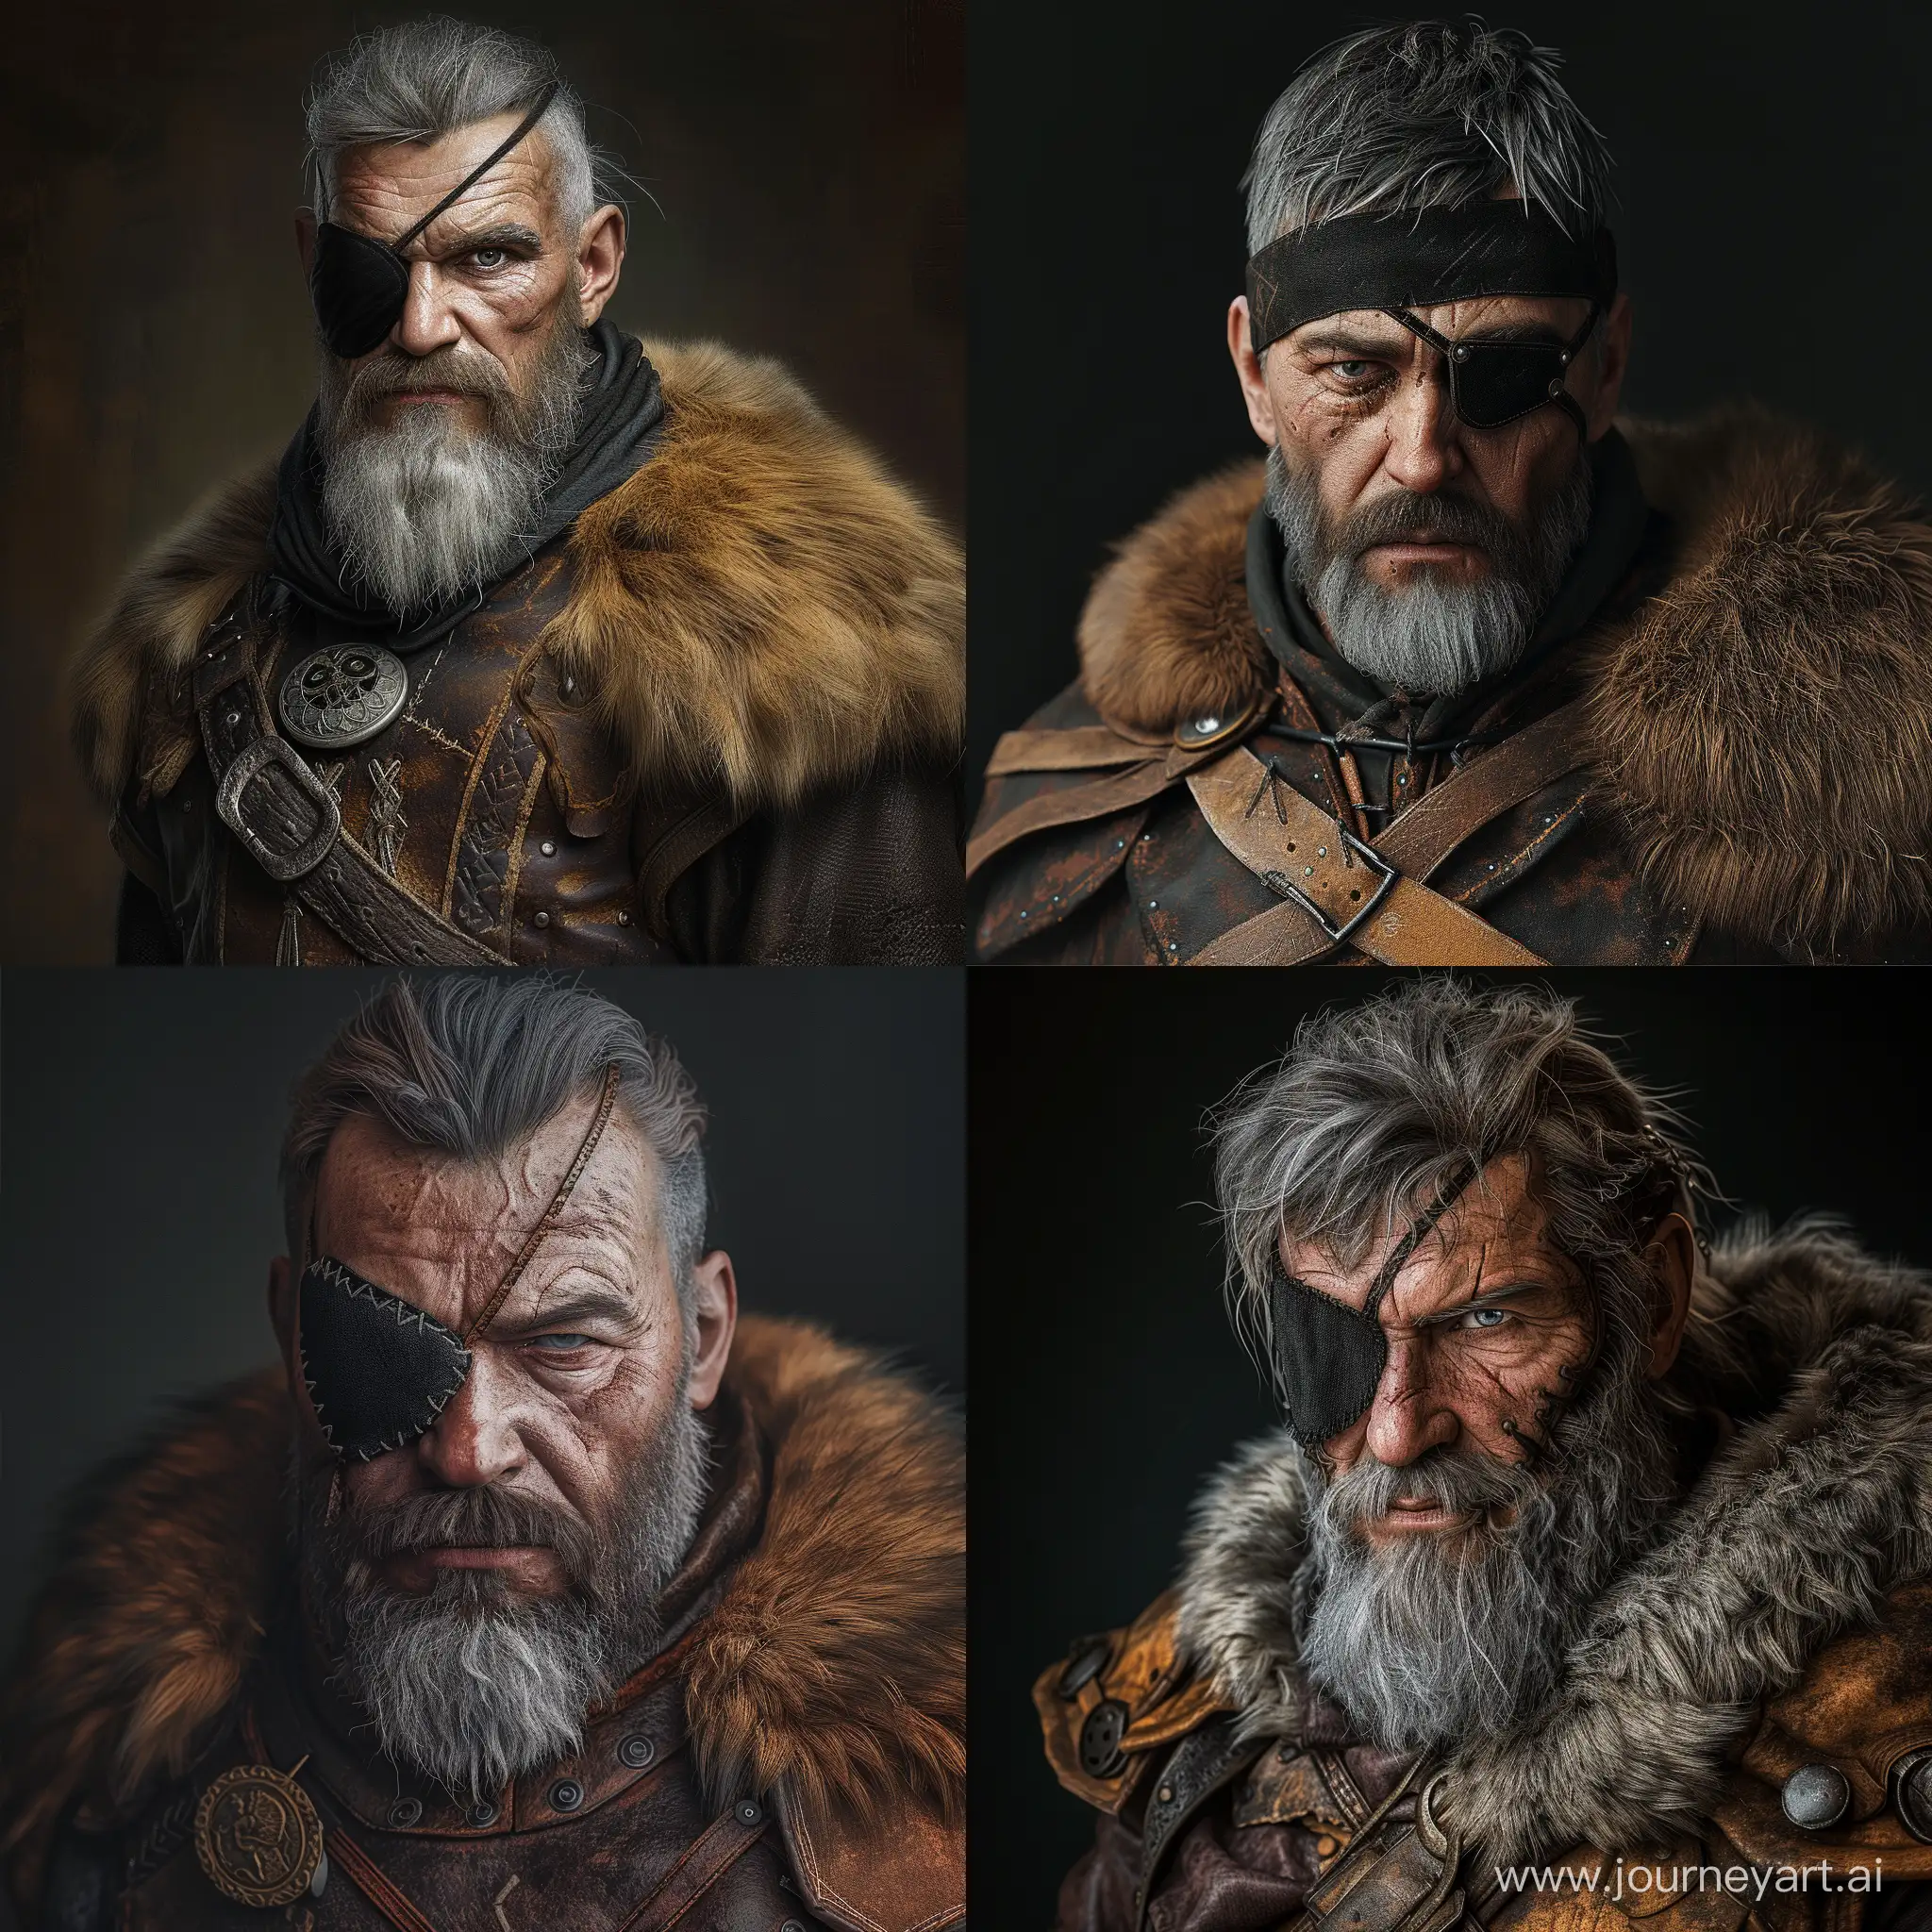 Czech Warlord Jan Zizka, Grizzled Beard, Thinning Gray Hair, his one eye is hidden with a black cloth eyepatch, wearing a leather tunic with fur collar and fur hat, cinematic shots, realistic, 4k, photo realistic, cinematic lighting, oil painting, brush strikes